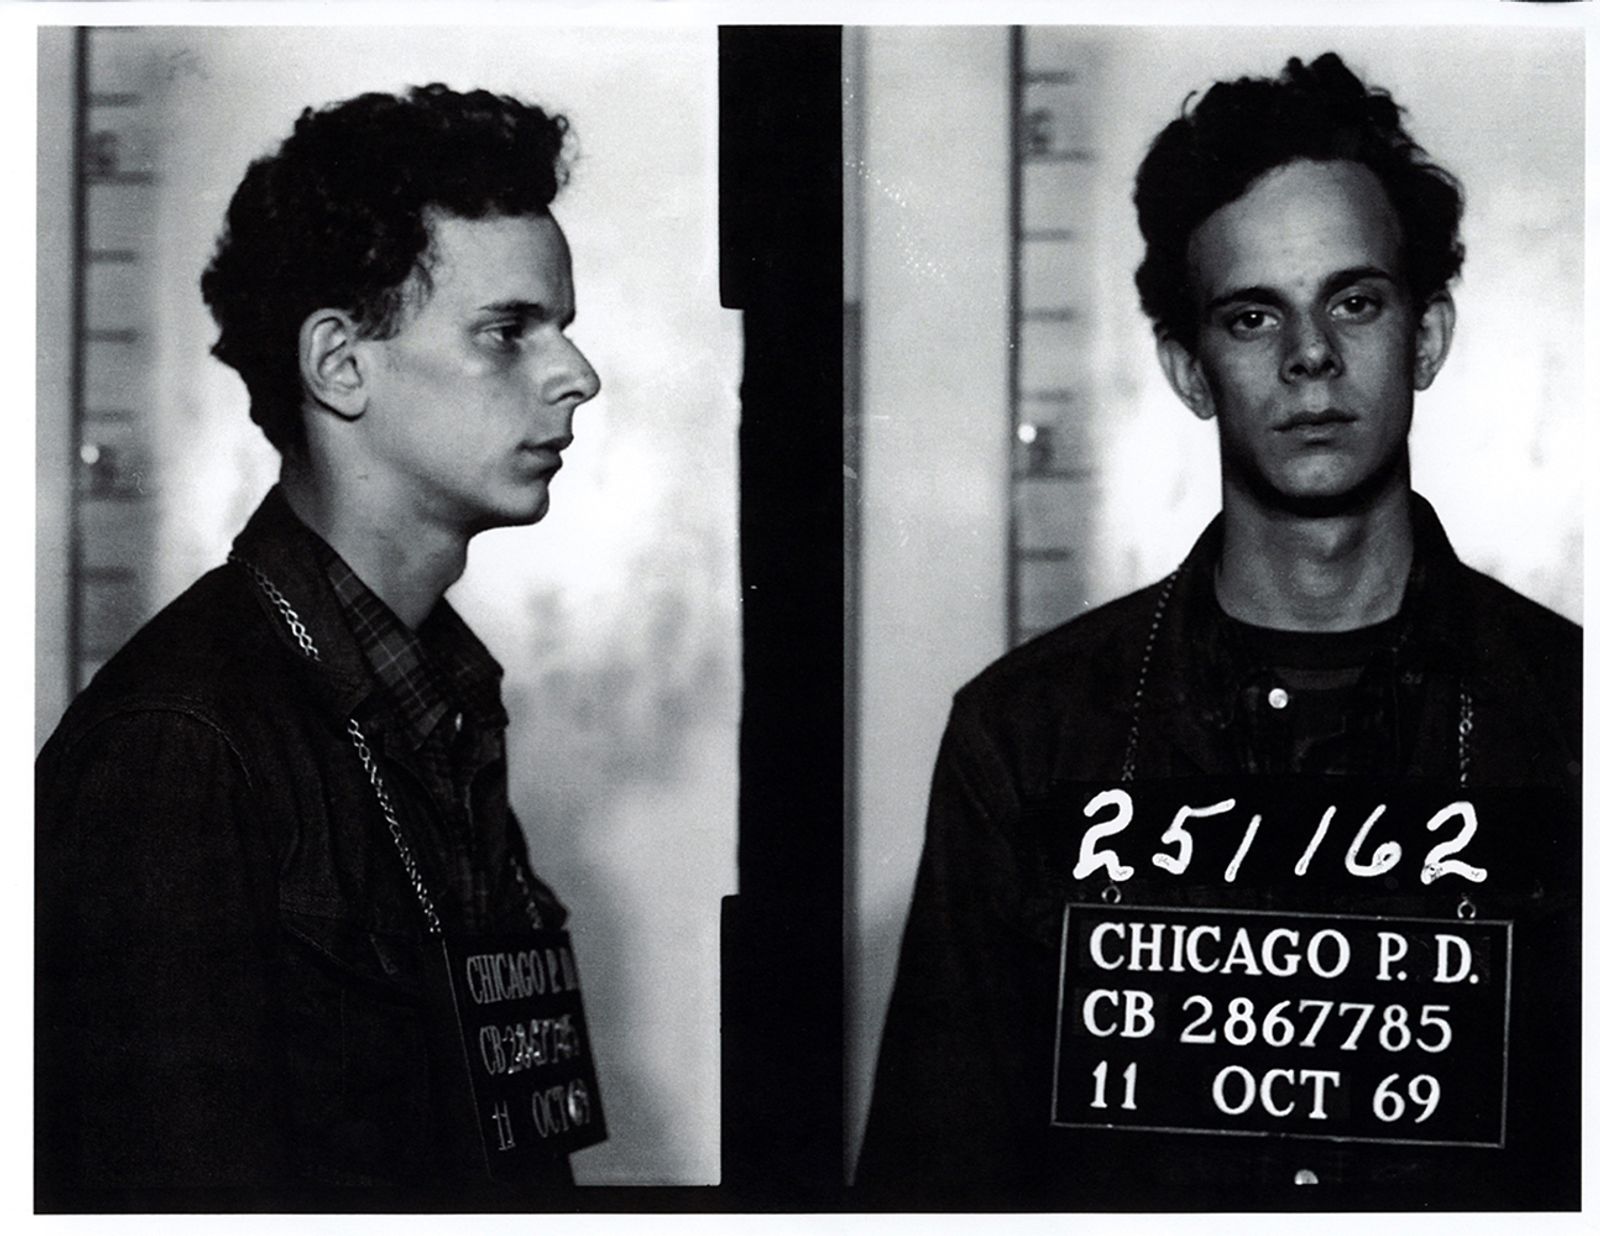 © Alice Proujansky - My dad's mug shots, taken when he was arrested for mob action during the 1968 Days of Rage in Chicago.